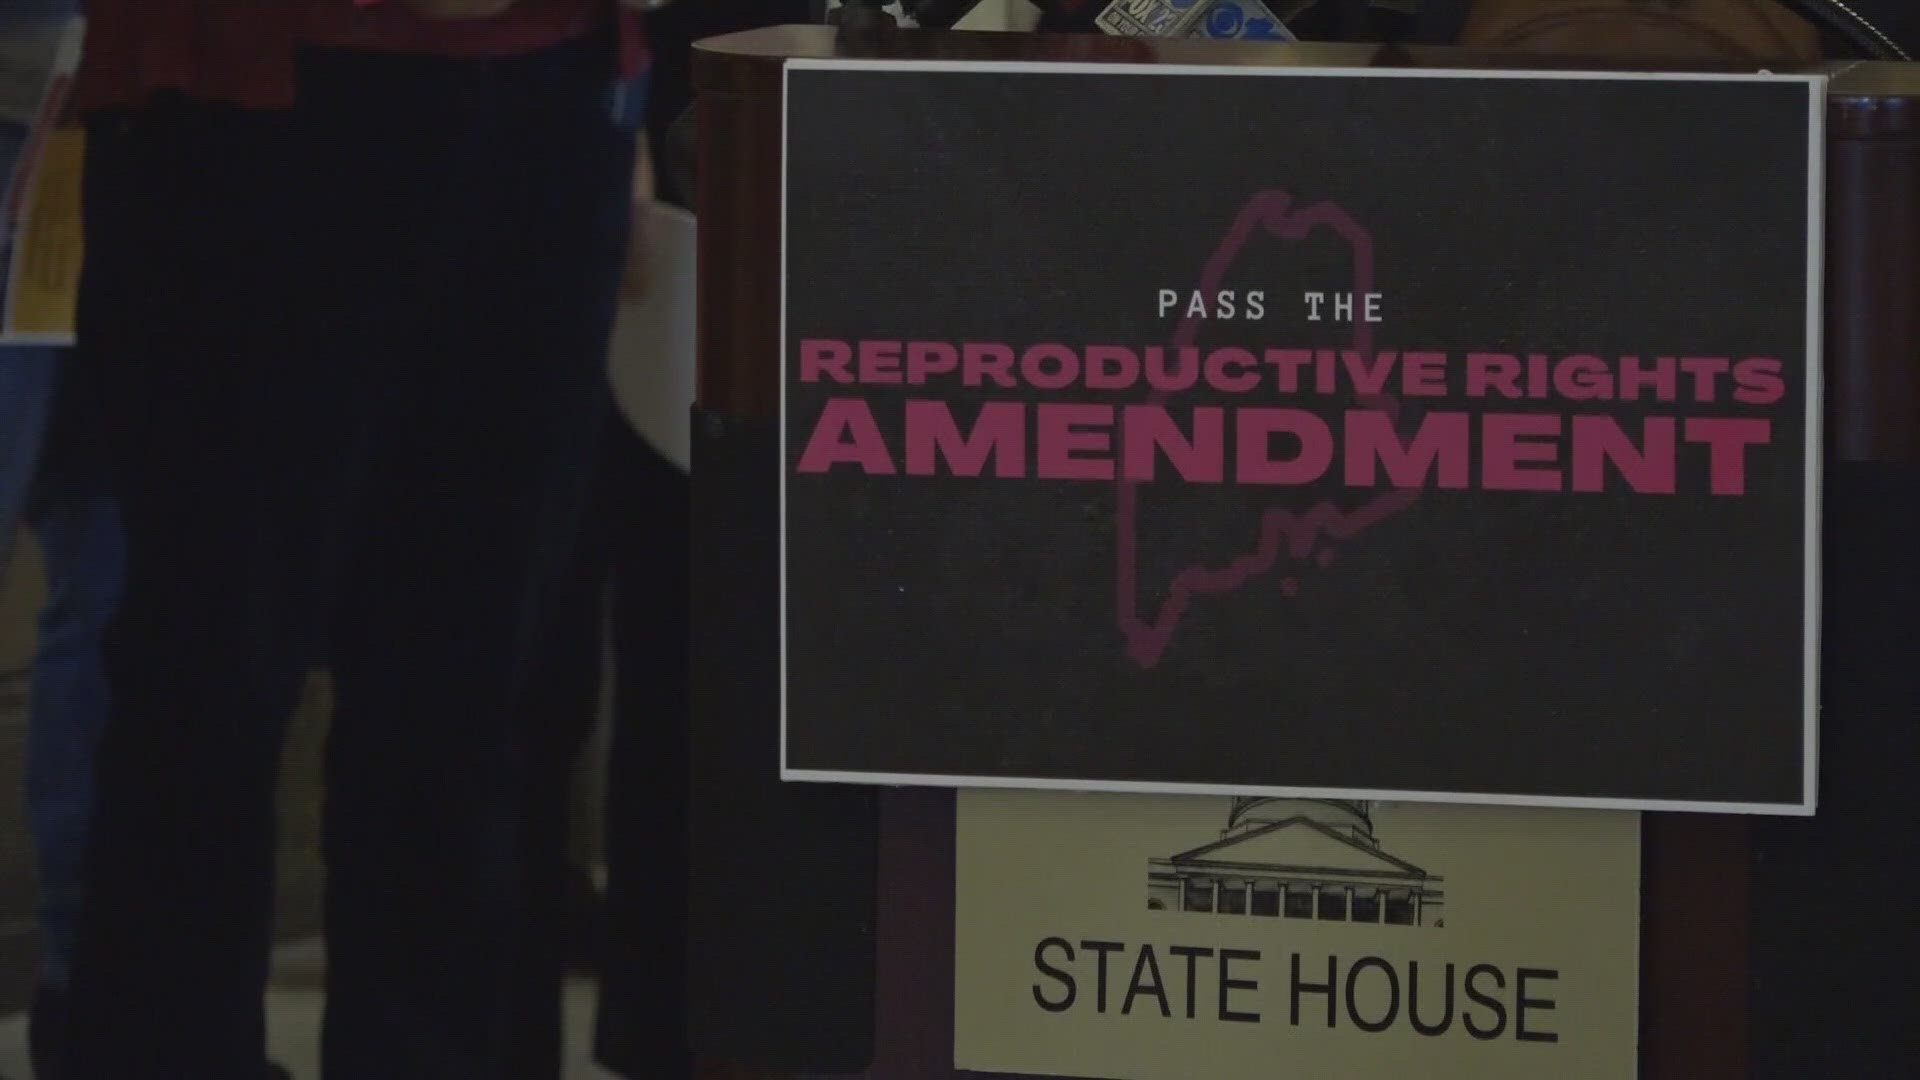 Senate Majority Leader Eloise Vitelli's bill seeks to add the right to an abortion to the state constitution.